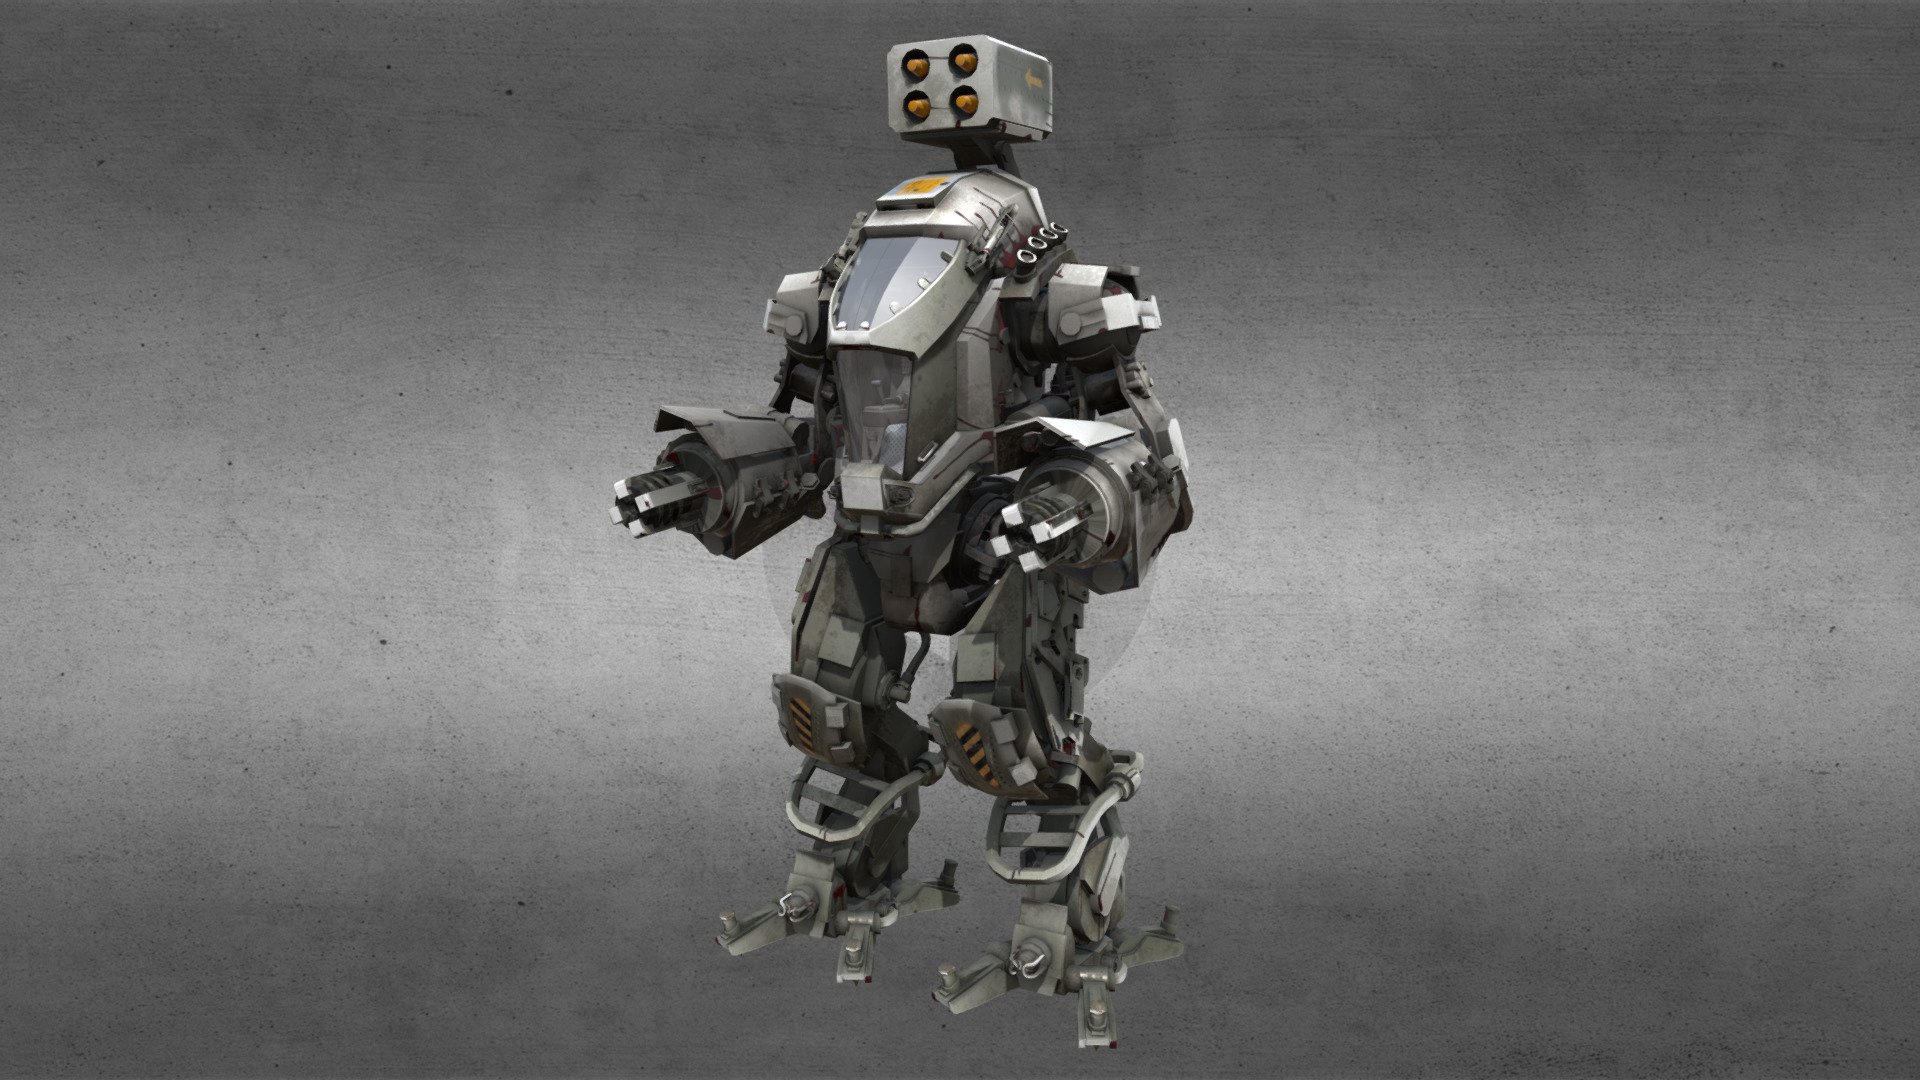 A sci-fi mech robot&hellip; use it to defend your base or to attack your enemies.

Features:




Approx 146,496 polygons.

Made entirely with 3 and 4 point polygons.

Arms, hands, legs, and feet are separate parts.

The canopy and missile rack are separate parts.

Textures:




The model is UV mapped.

One set of texture, specular, and normal bump maps, at 4096x4096 pixels.

Model created by Moscowich80 and sold here with permission 3d model